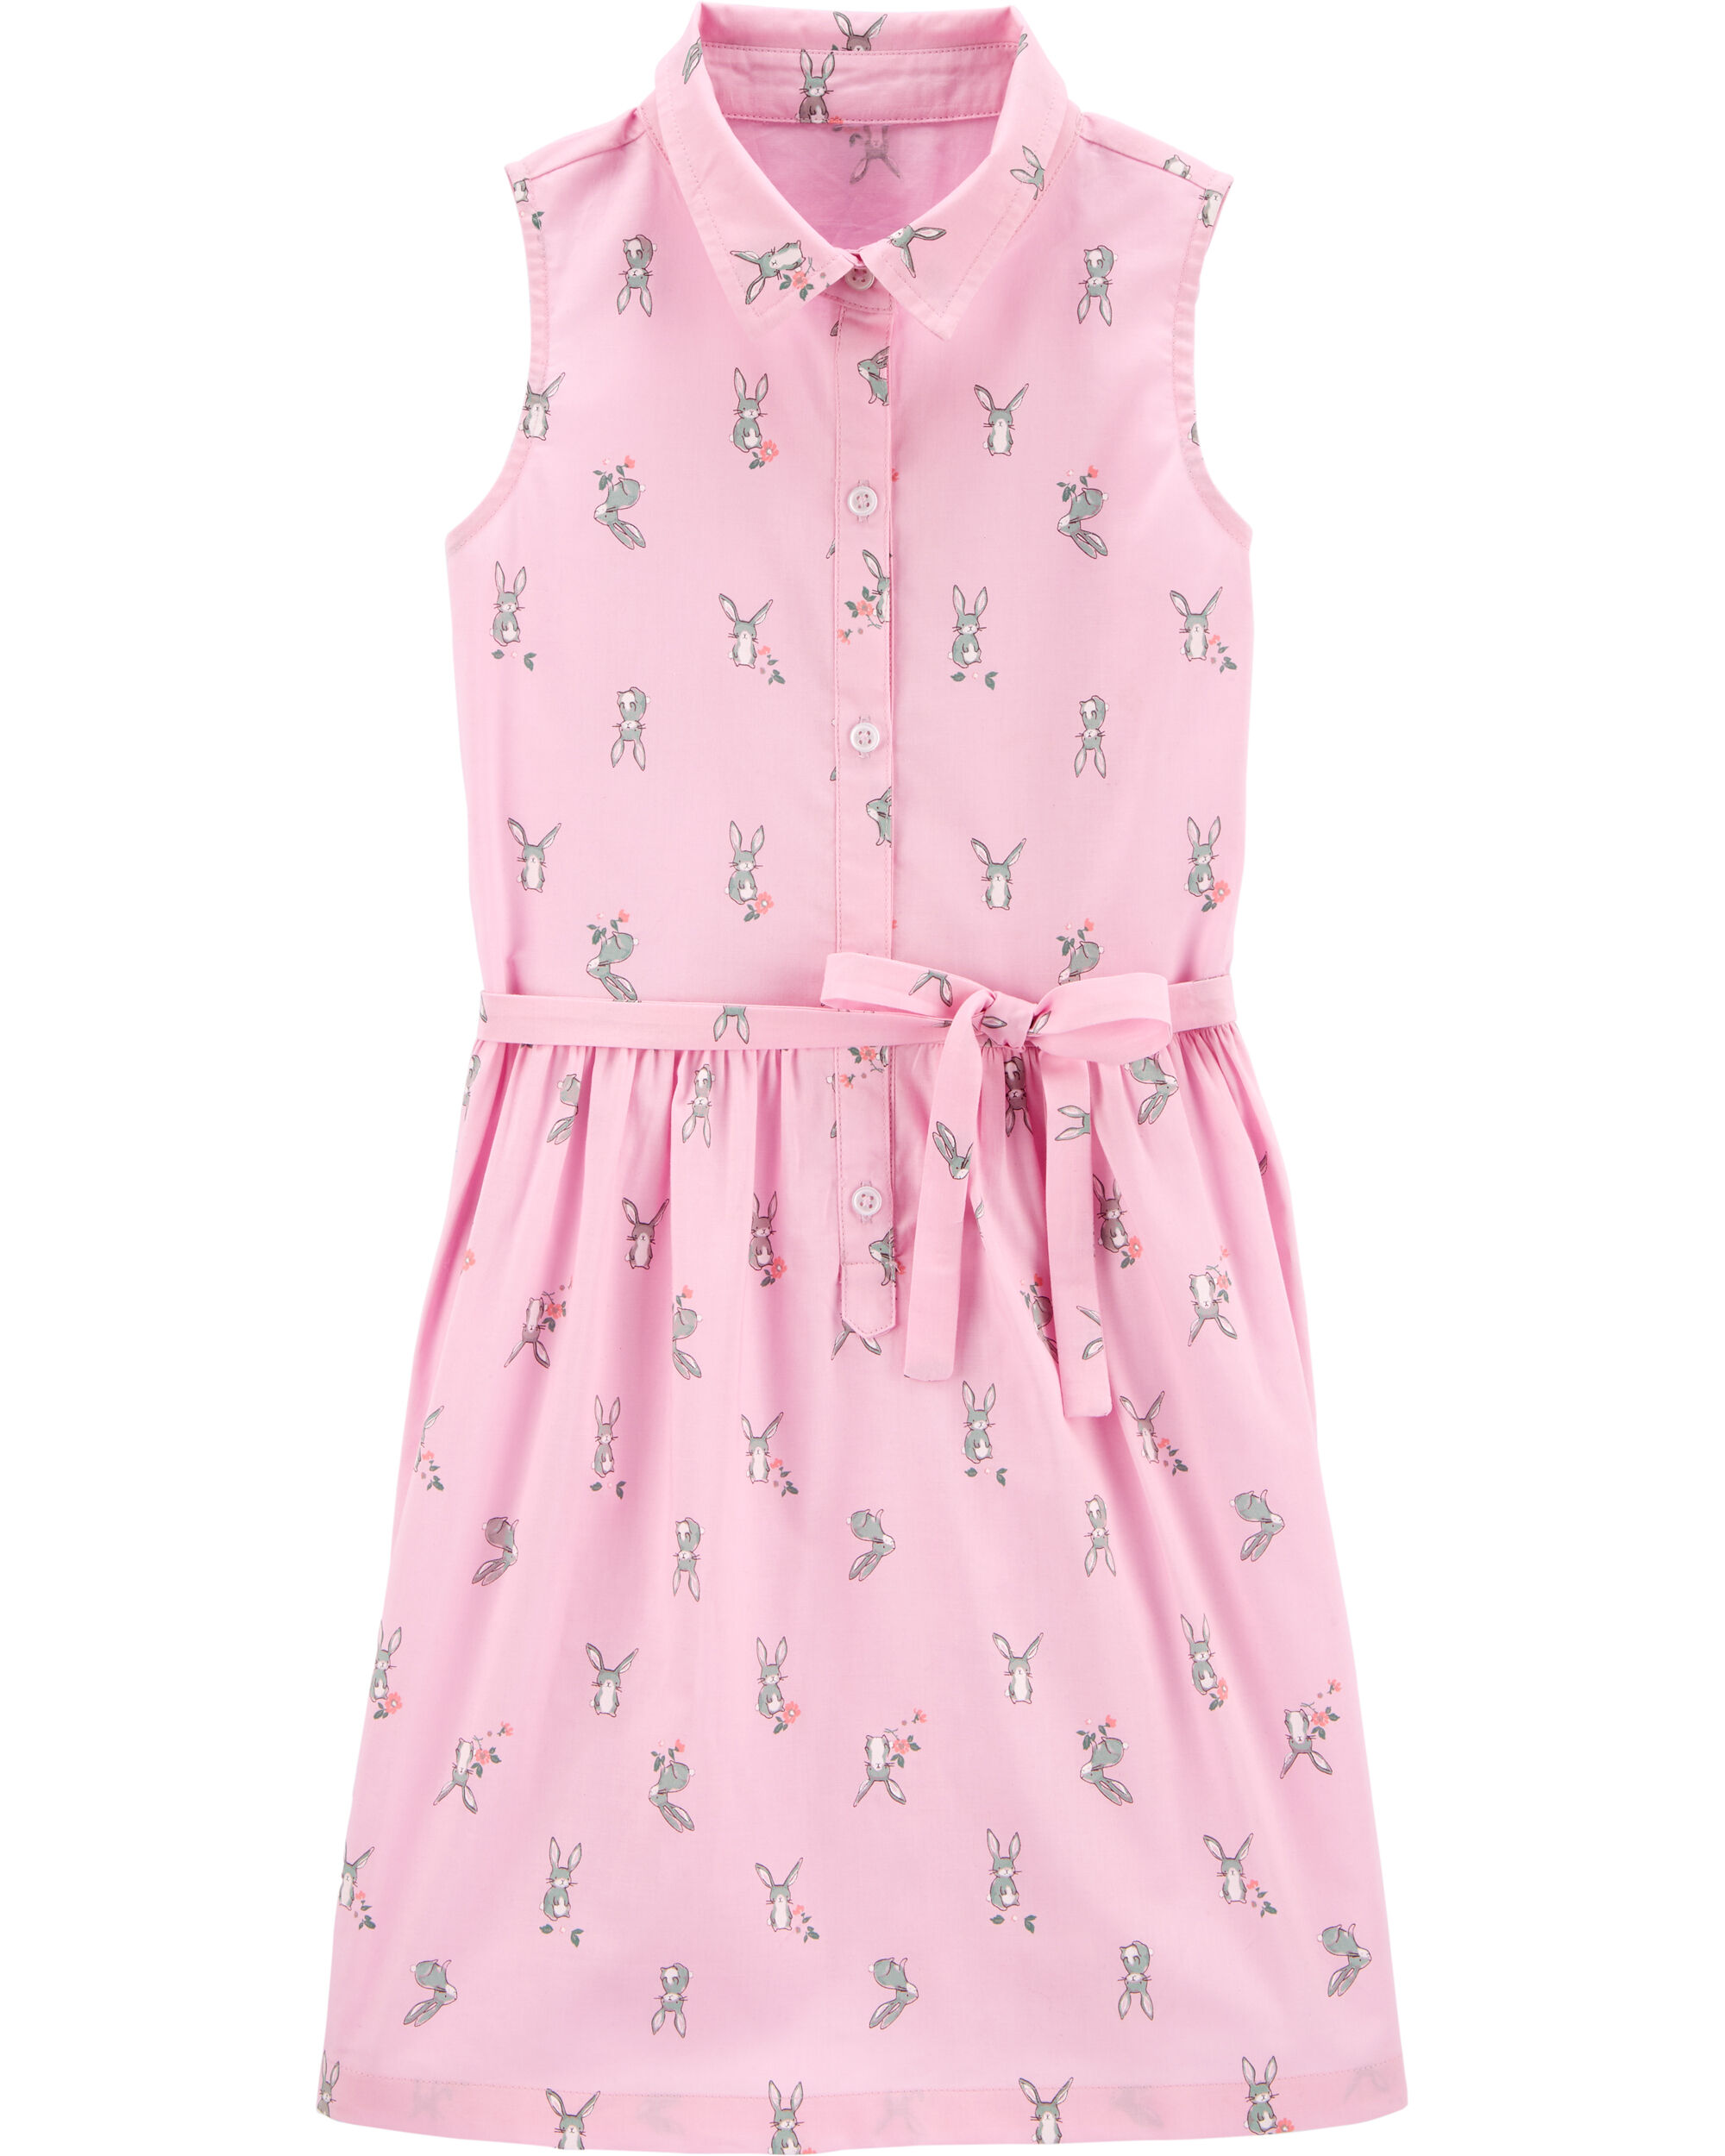 Baby Girl Easter Clothes Sleeveless Pink Bunny Print One-Piece Dress Outfit Set